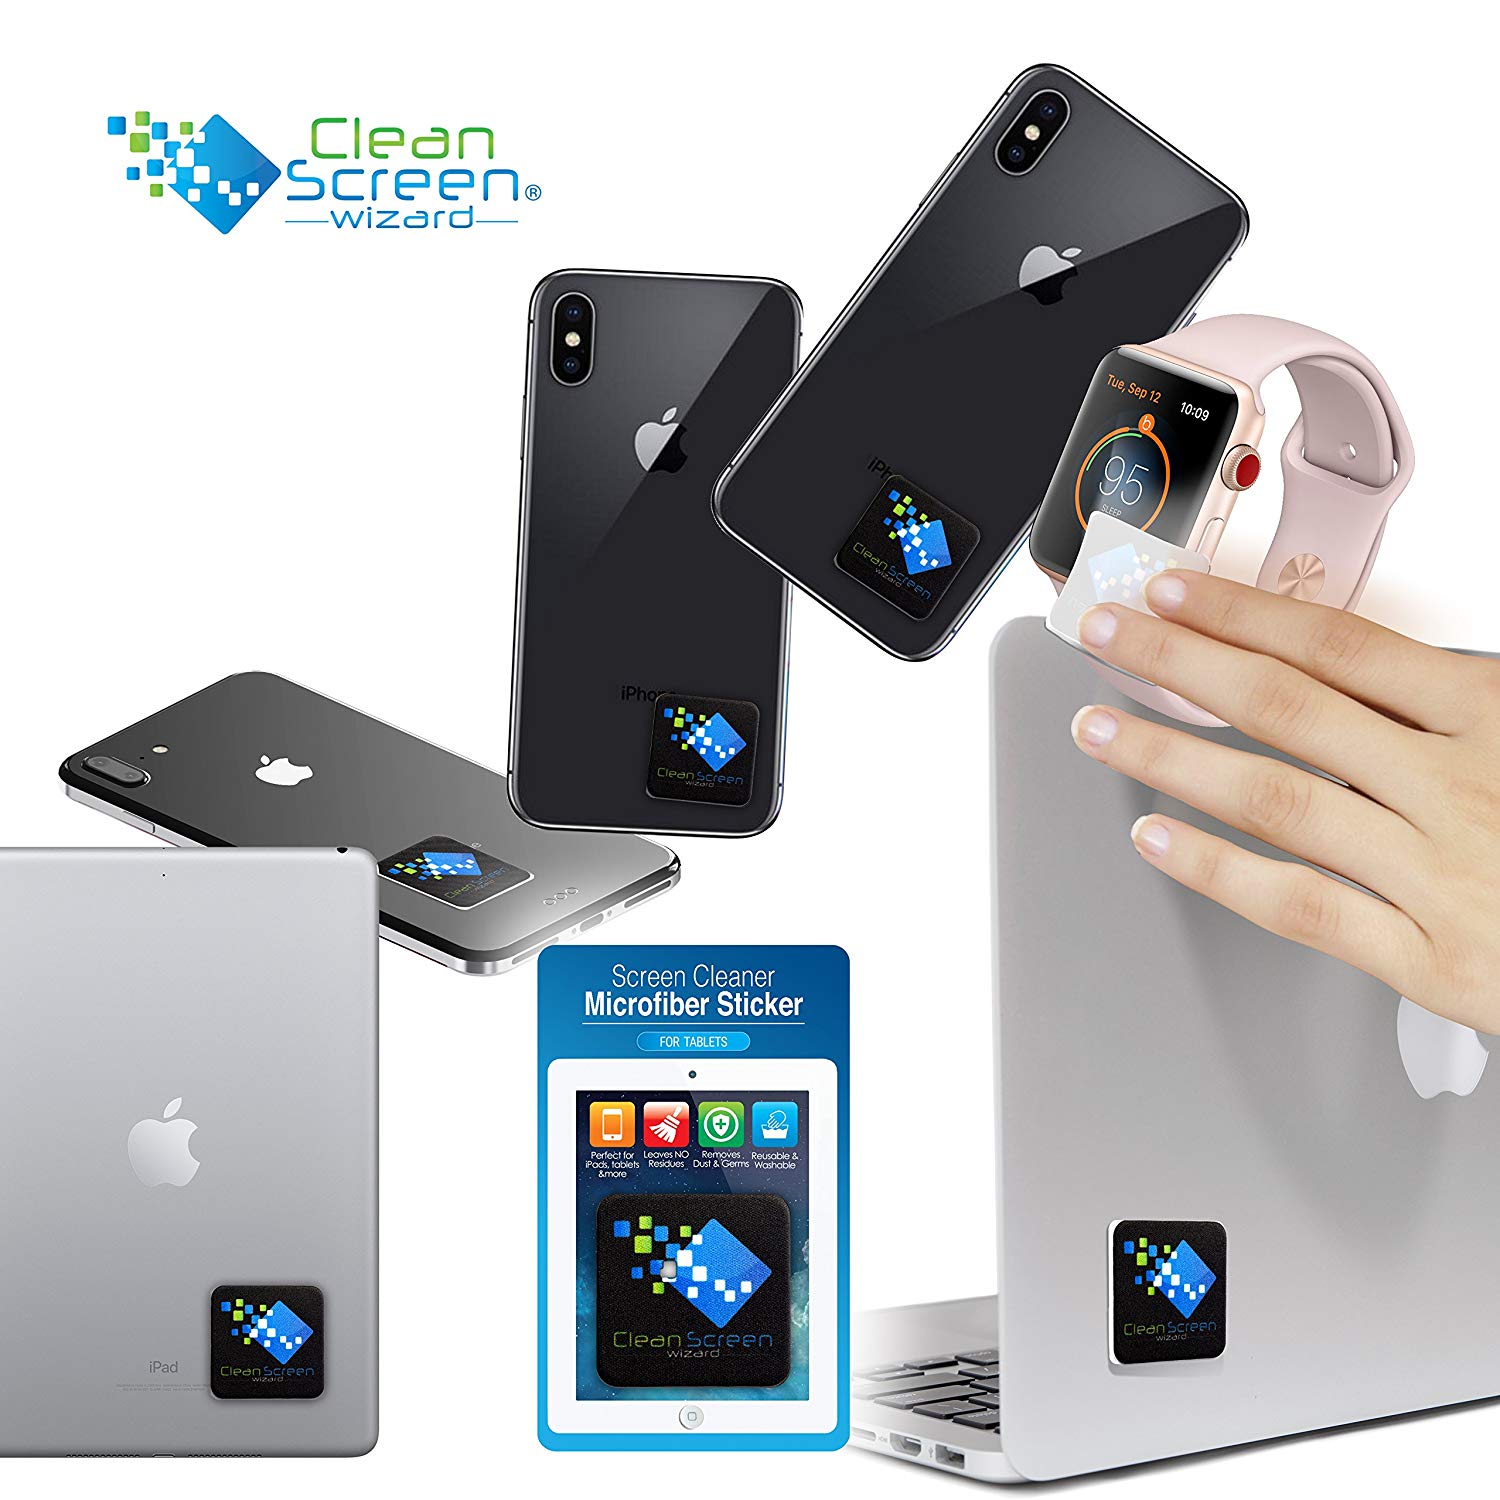 DigiClean Screen Cleaner Stickers - Promotional Product Giveaways for  Mobile Phones, Tablets, Laptops and more